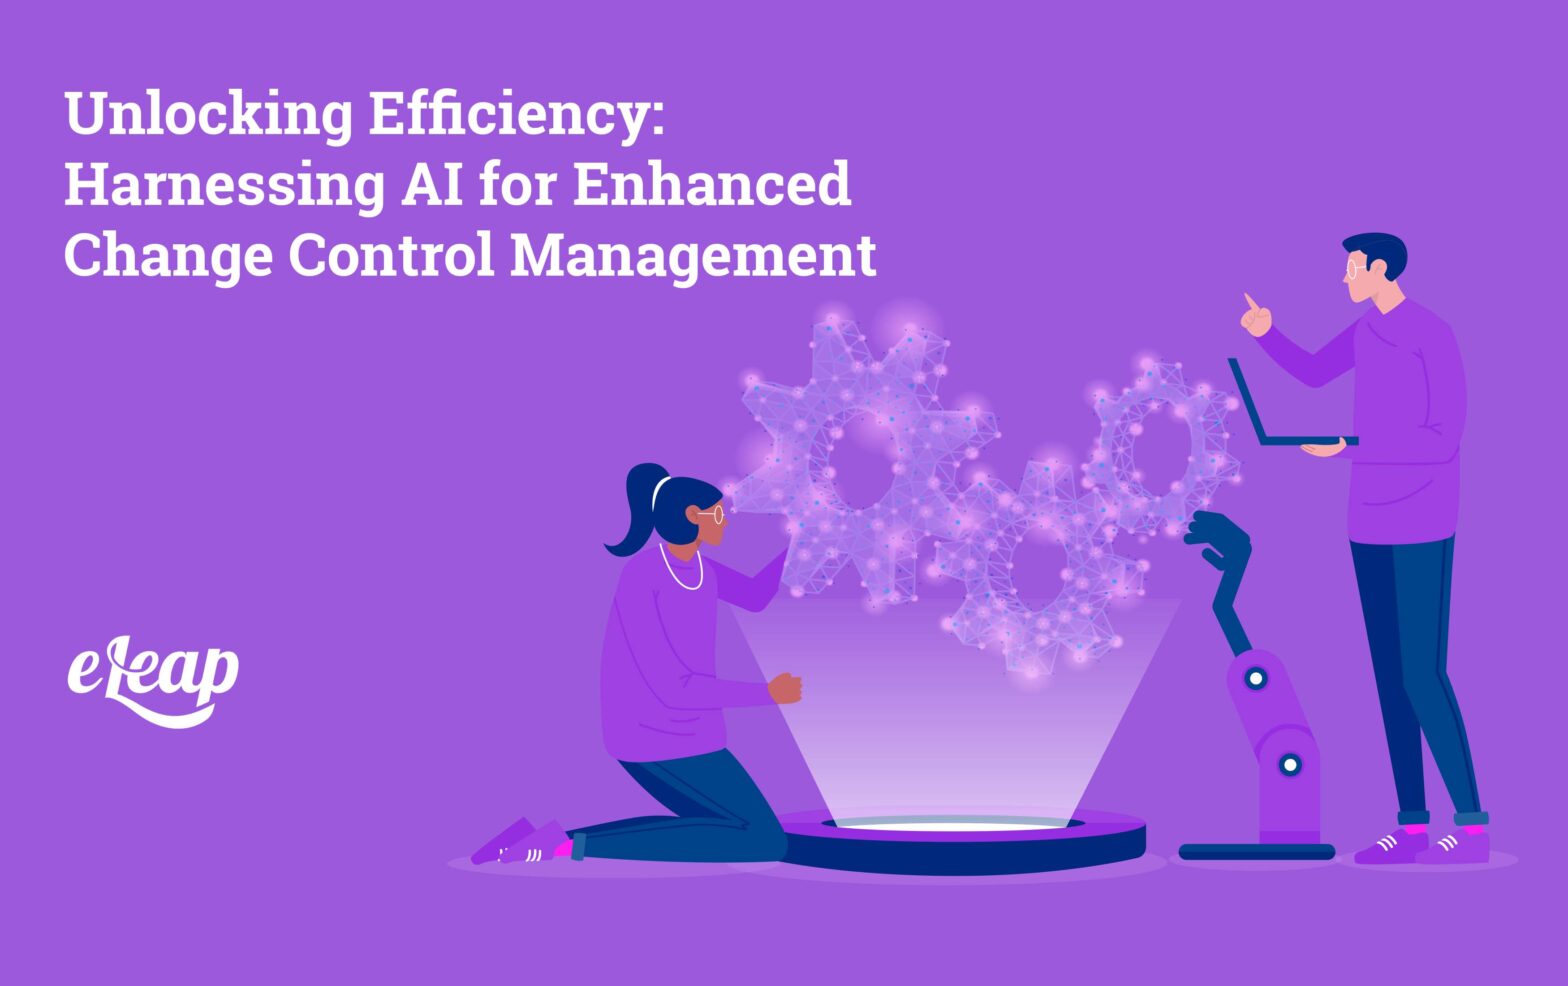 Unlocking Efficiency: Harnessing AI for Enhanced Change Control Management